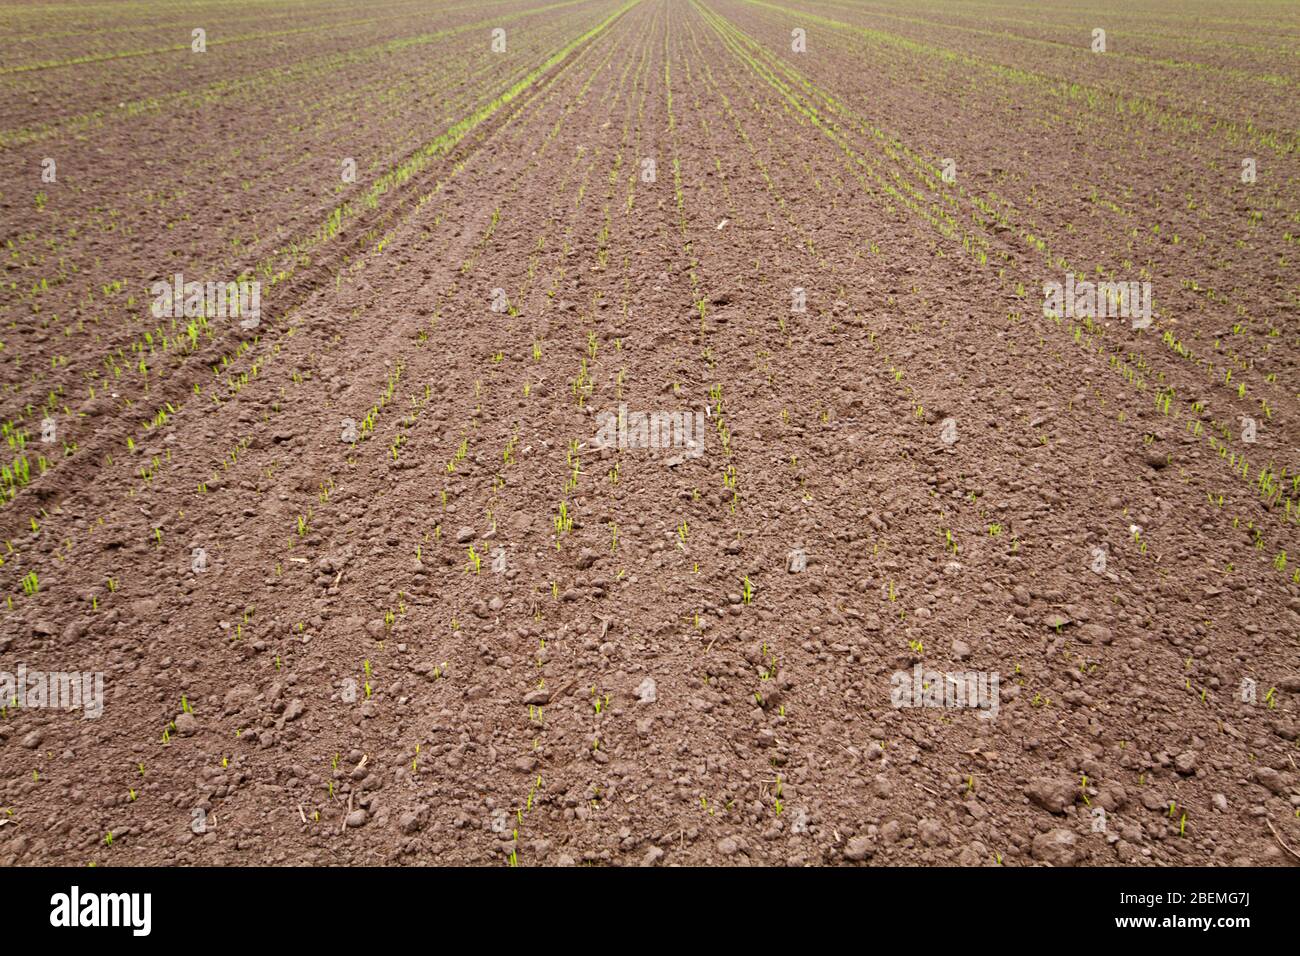 Young corn plants, just germinated, growing in rows on a field with fertile soil Stock Photo